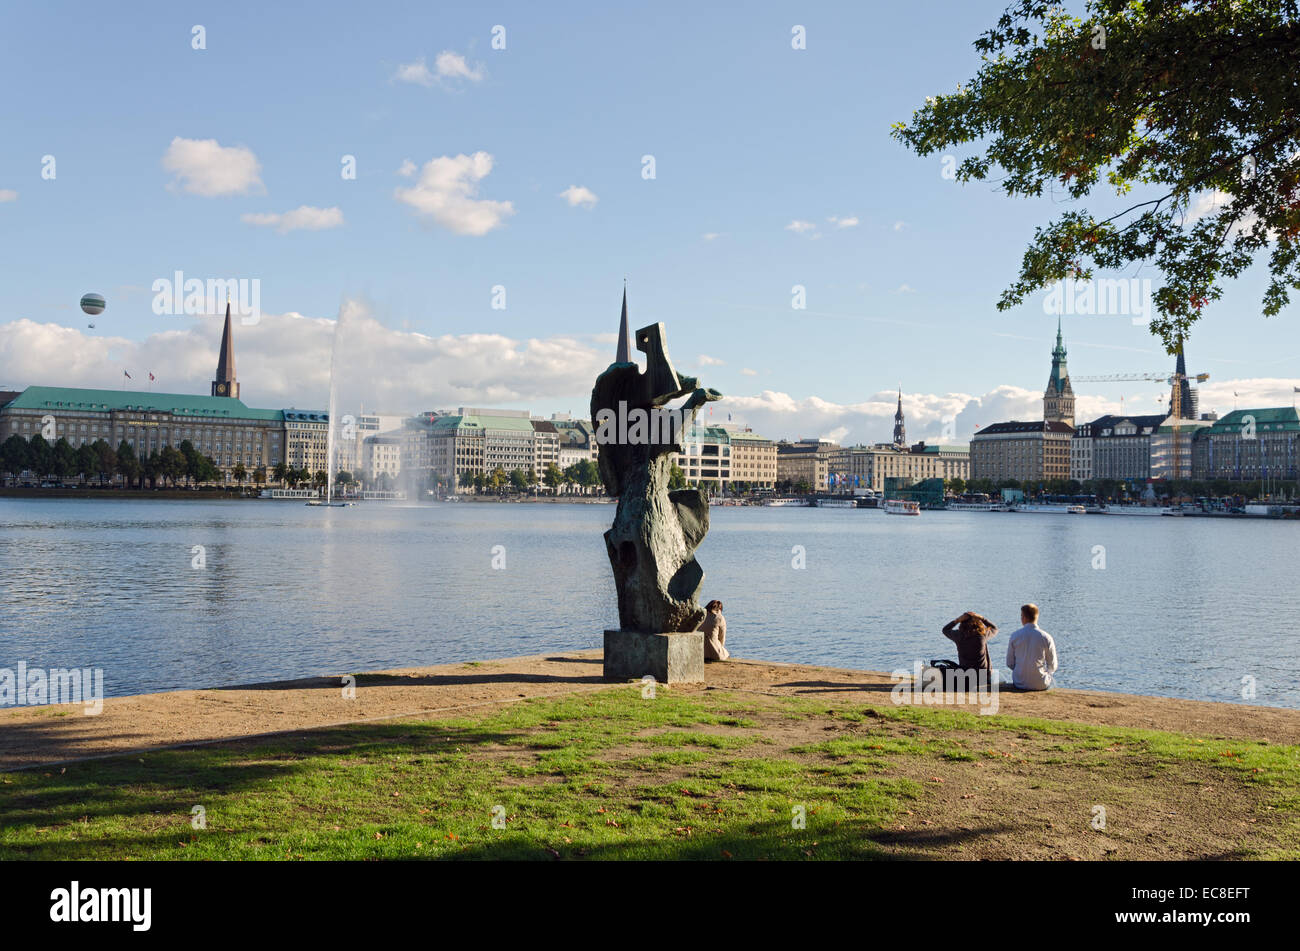 HAMBURG, GERMANY - SEPTEMBER 26: A group of young people seated next to a sculpture at the edge of Lake Alster on September 26, Stock Photo